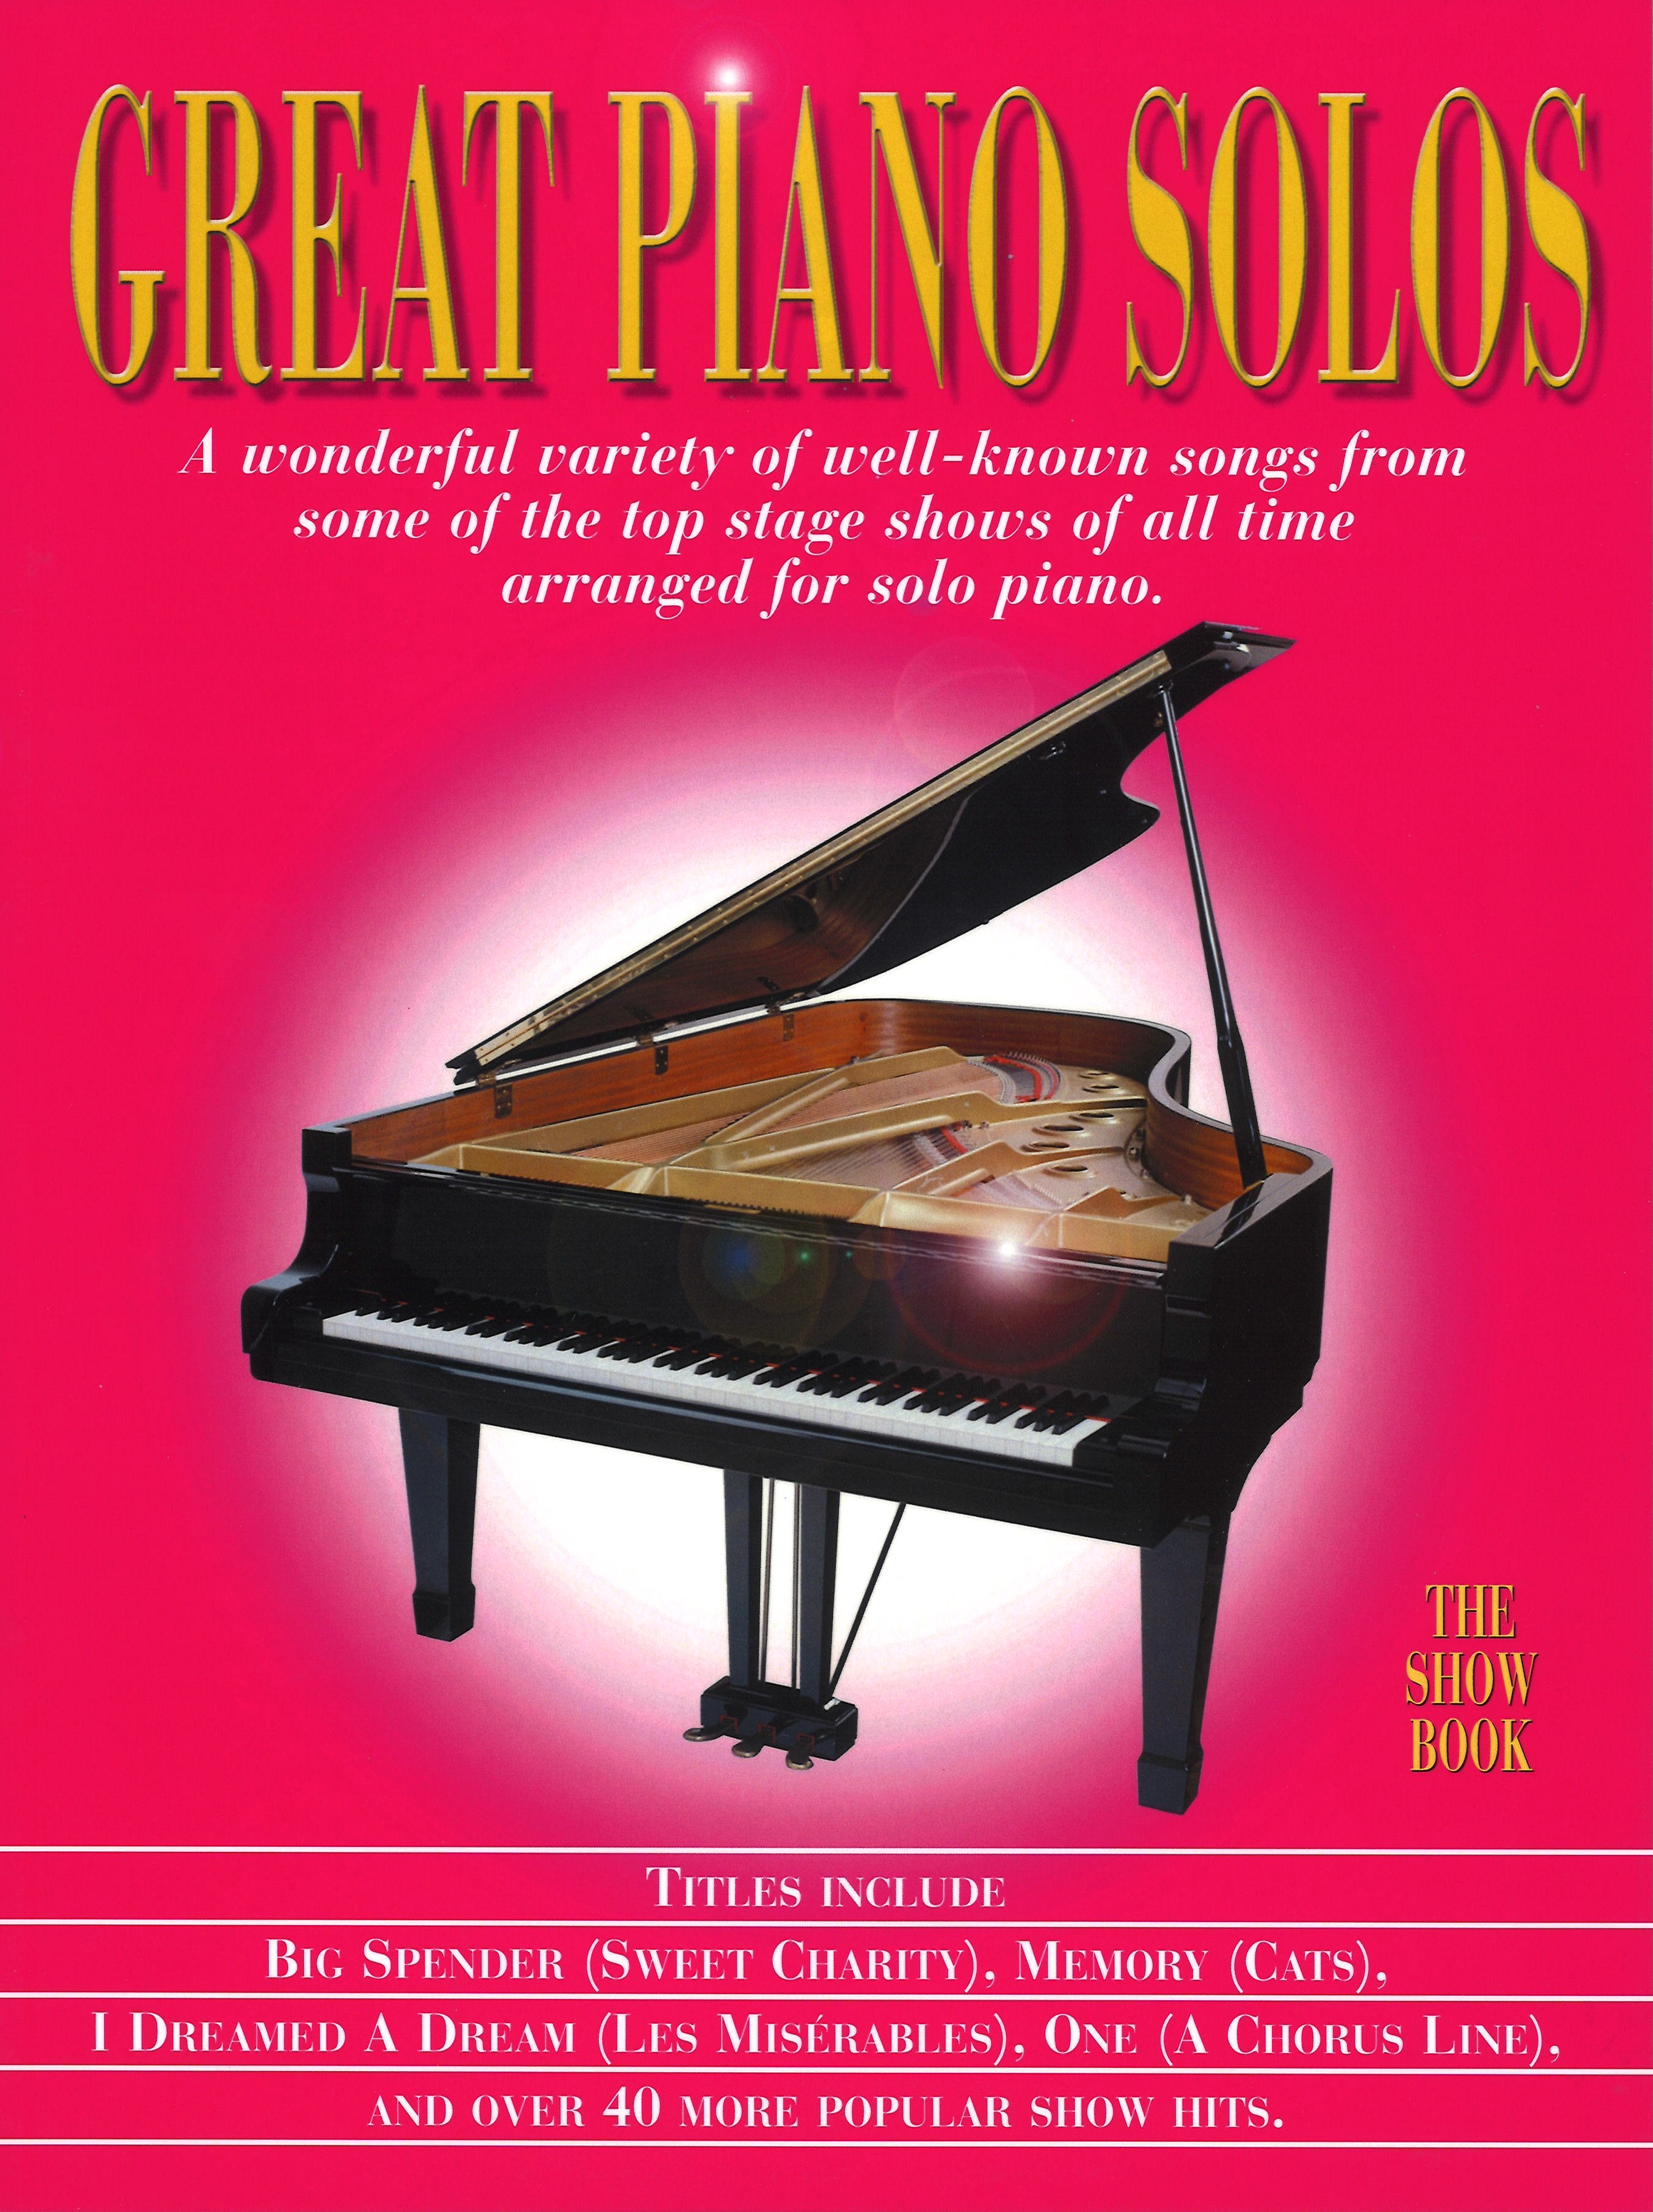 Great Piano Solos Show Book Sheet Music Songbook